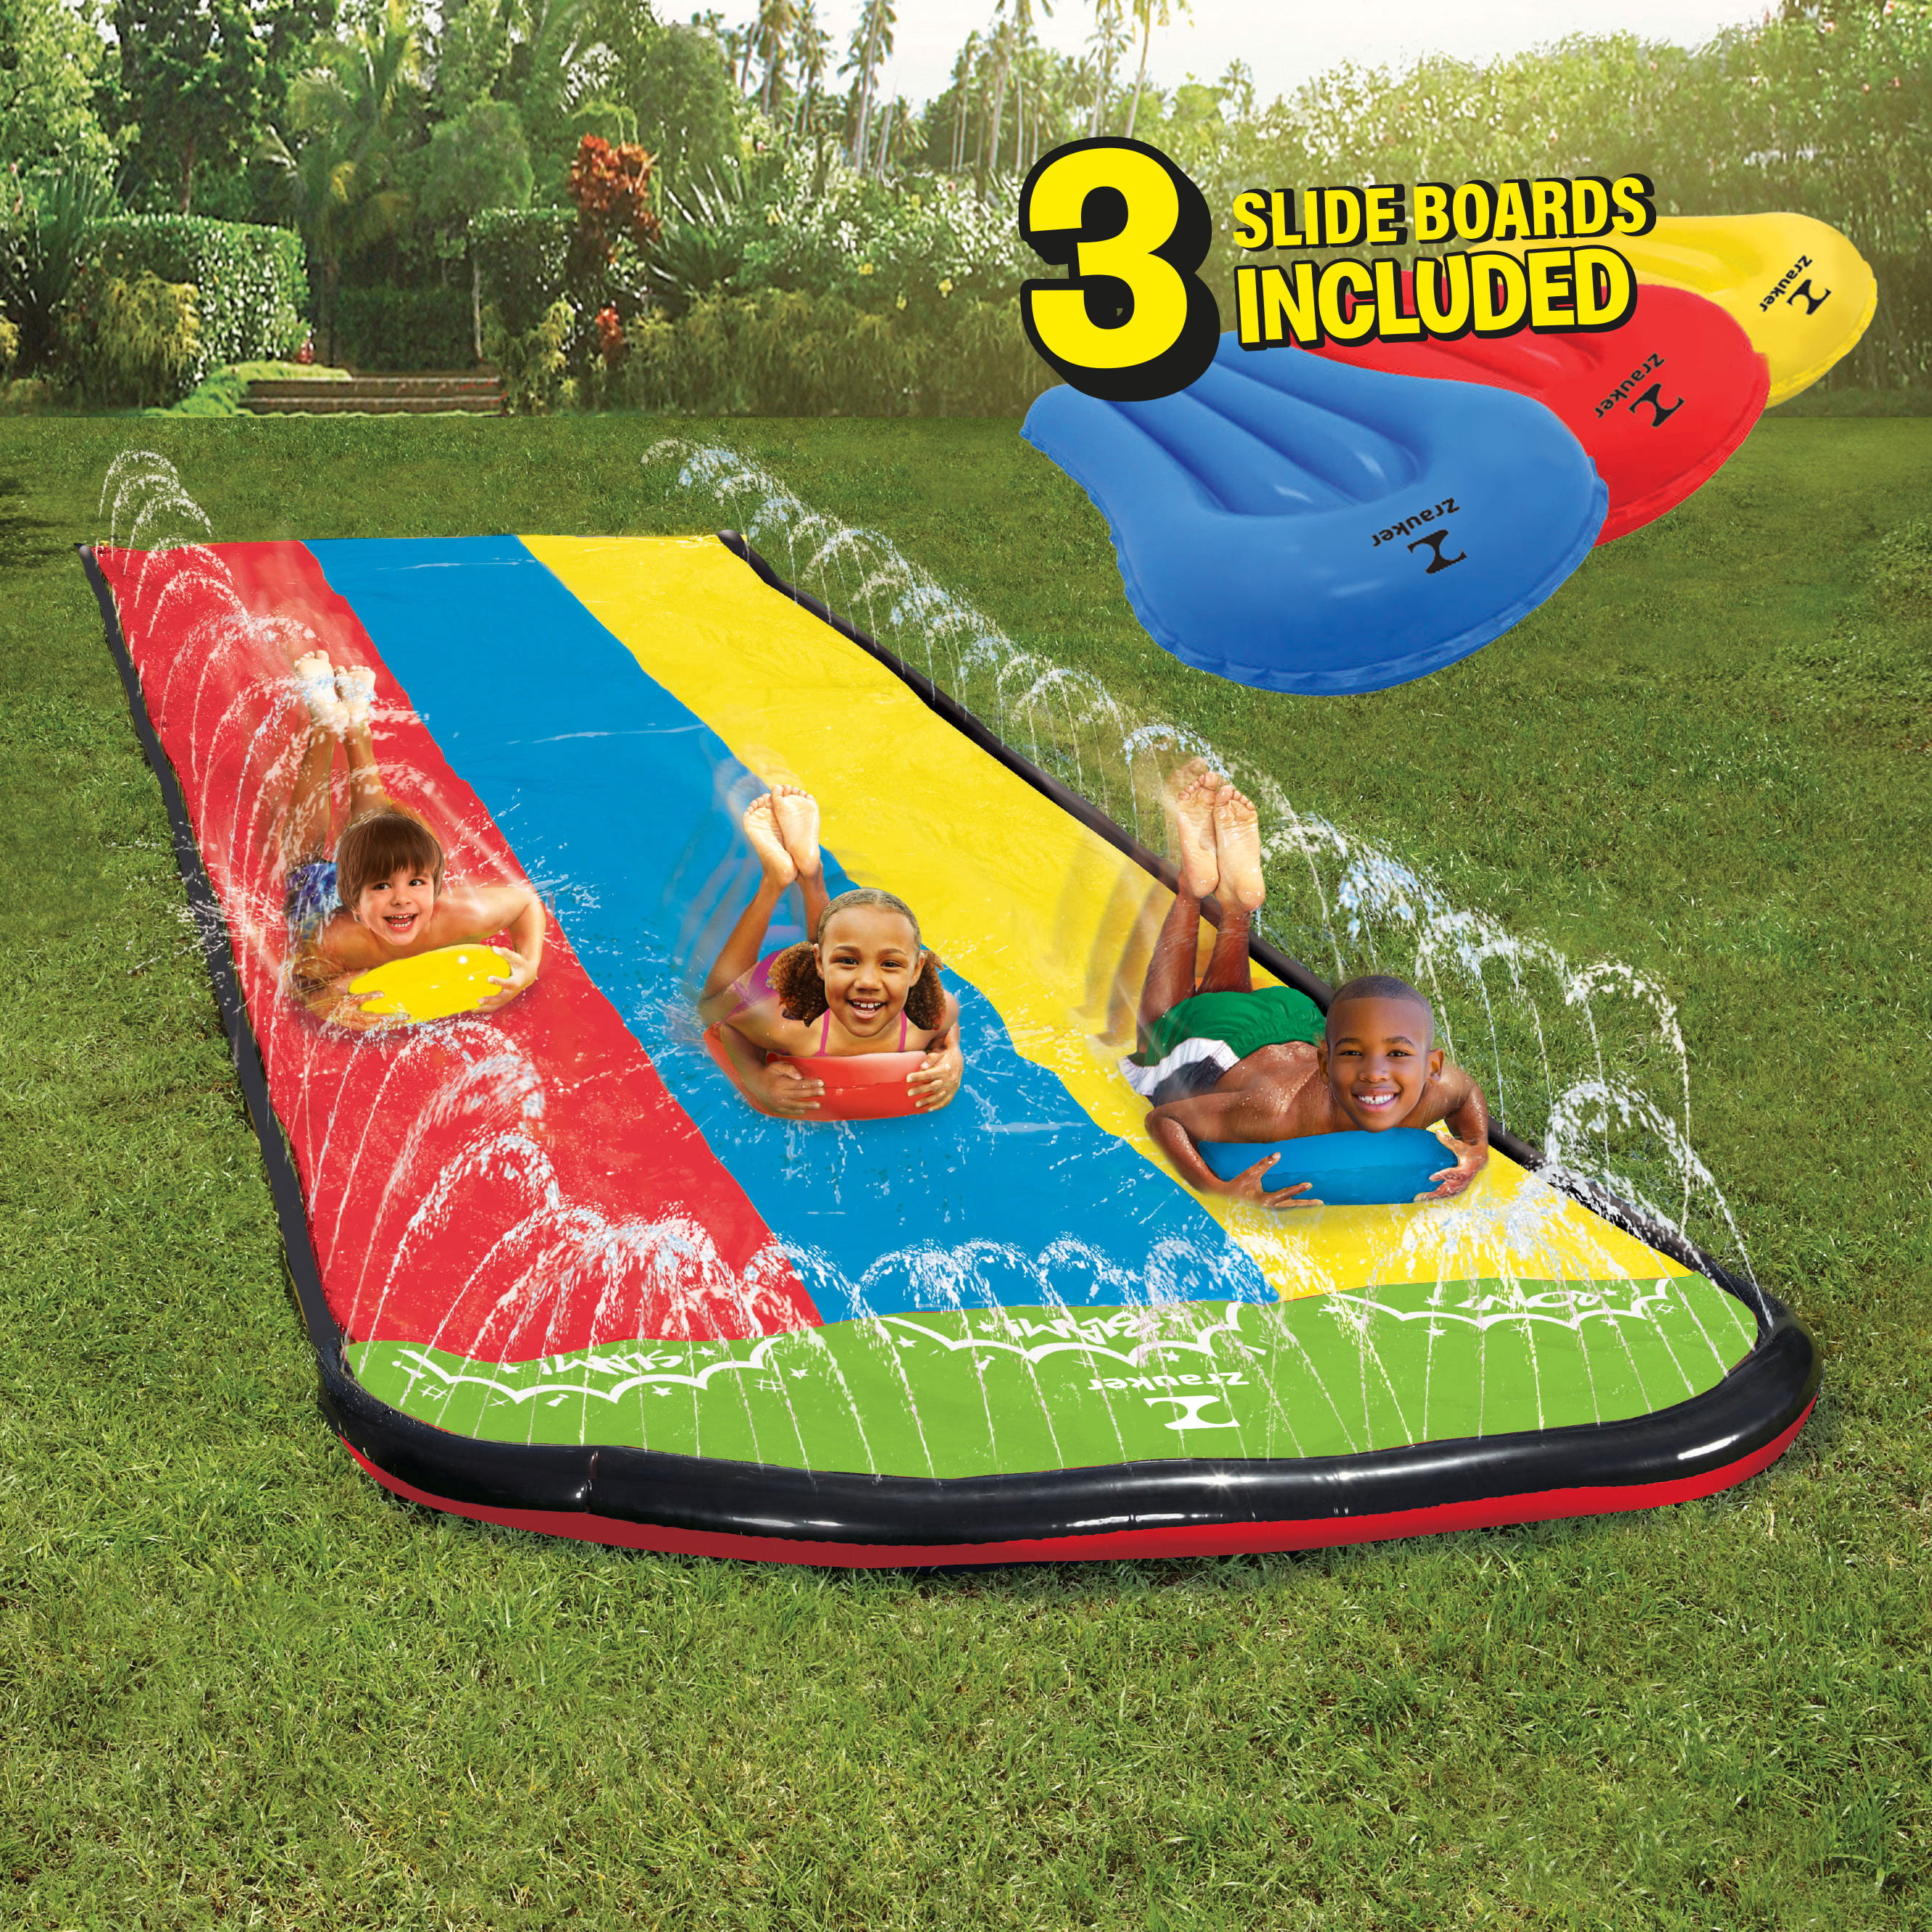 for Backyards| Water Splash Slide With 3 Boogie Boards 16 Foot Three Sliding Racing Lanes with Sprinklers Durable Quality PVC Construction Updated 2020 Model Splash and Slide Triple Lane Slip 